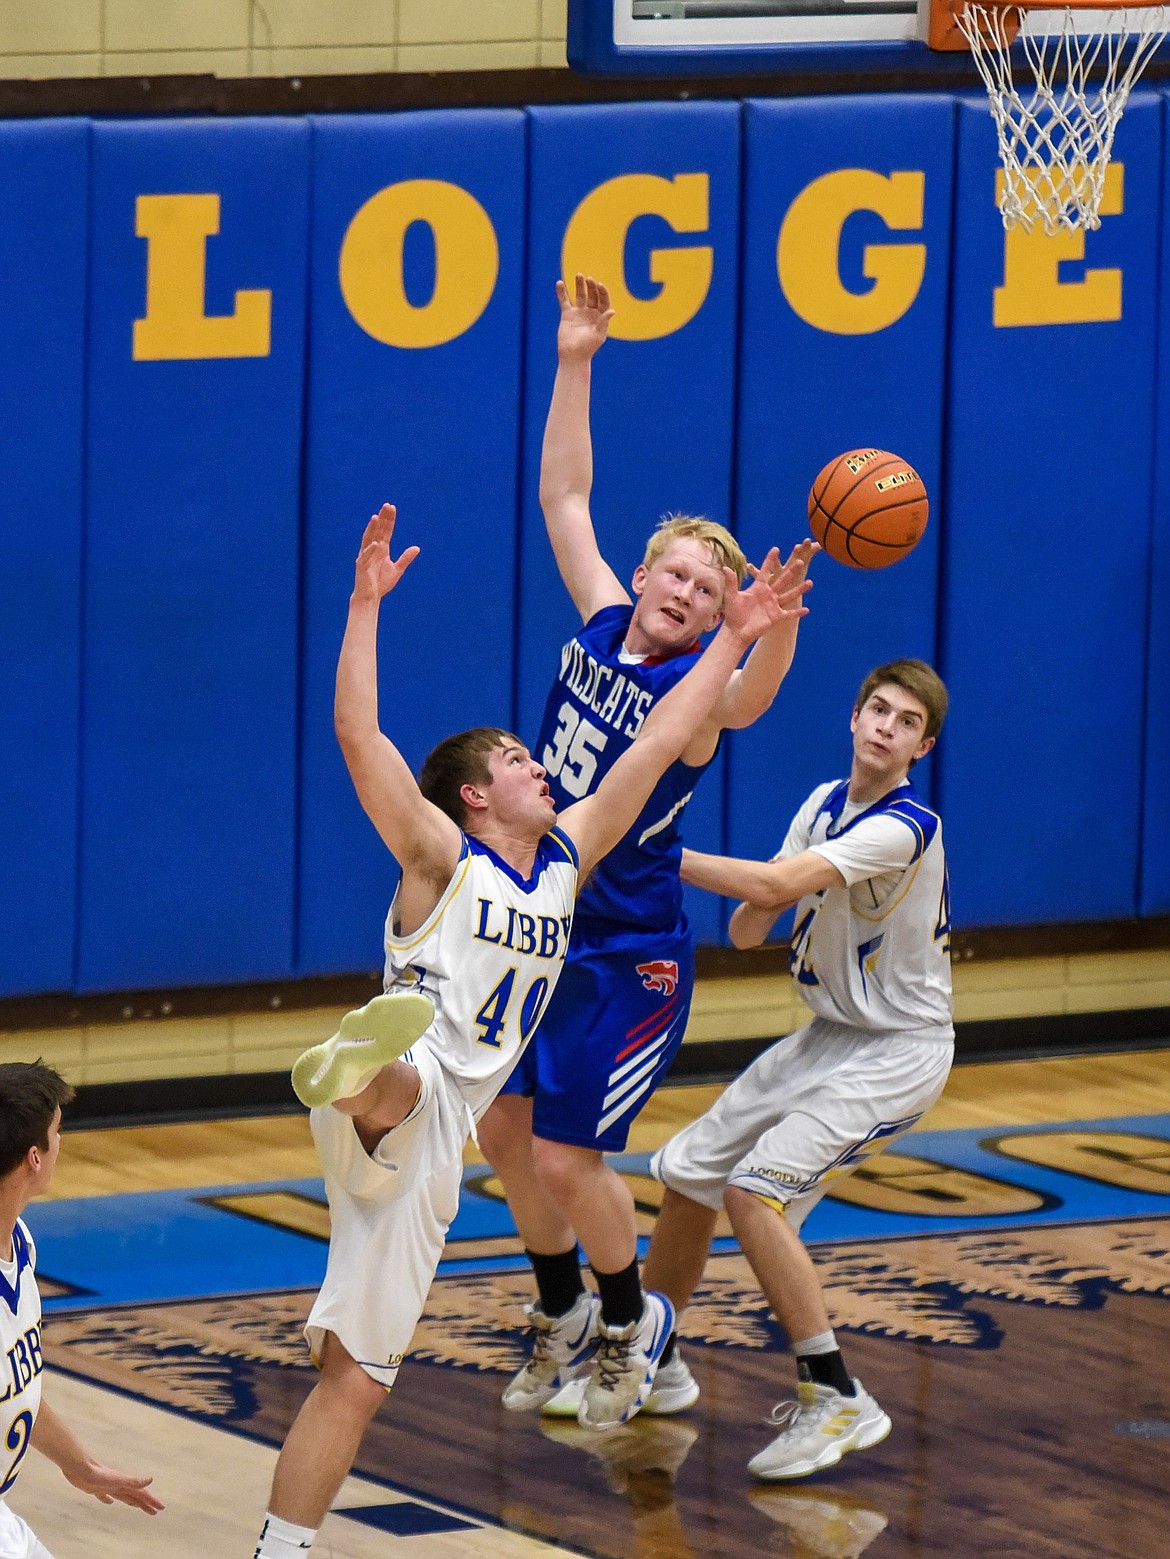 Libby senior Tim Goodman knocks away a pass from Columbia Falls senior Sam Hovde in the first quarter just before the buzzer Friday against Columbia Falls. (Ben Kibbey/The Western News)